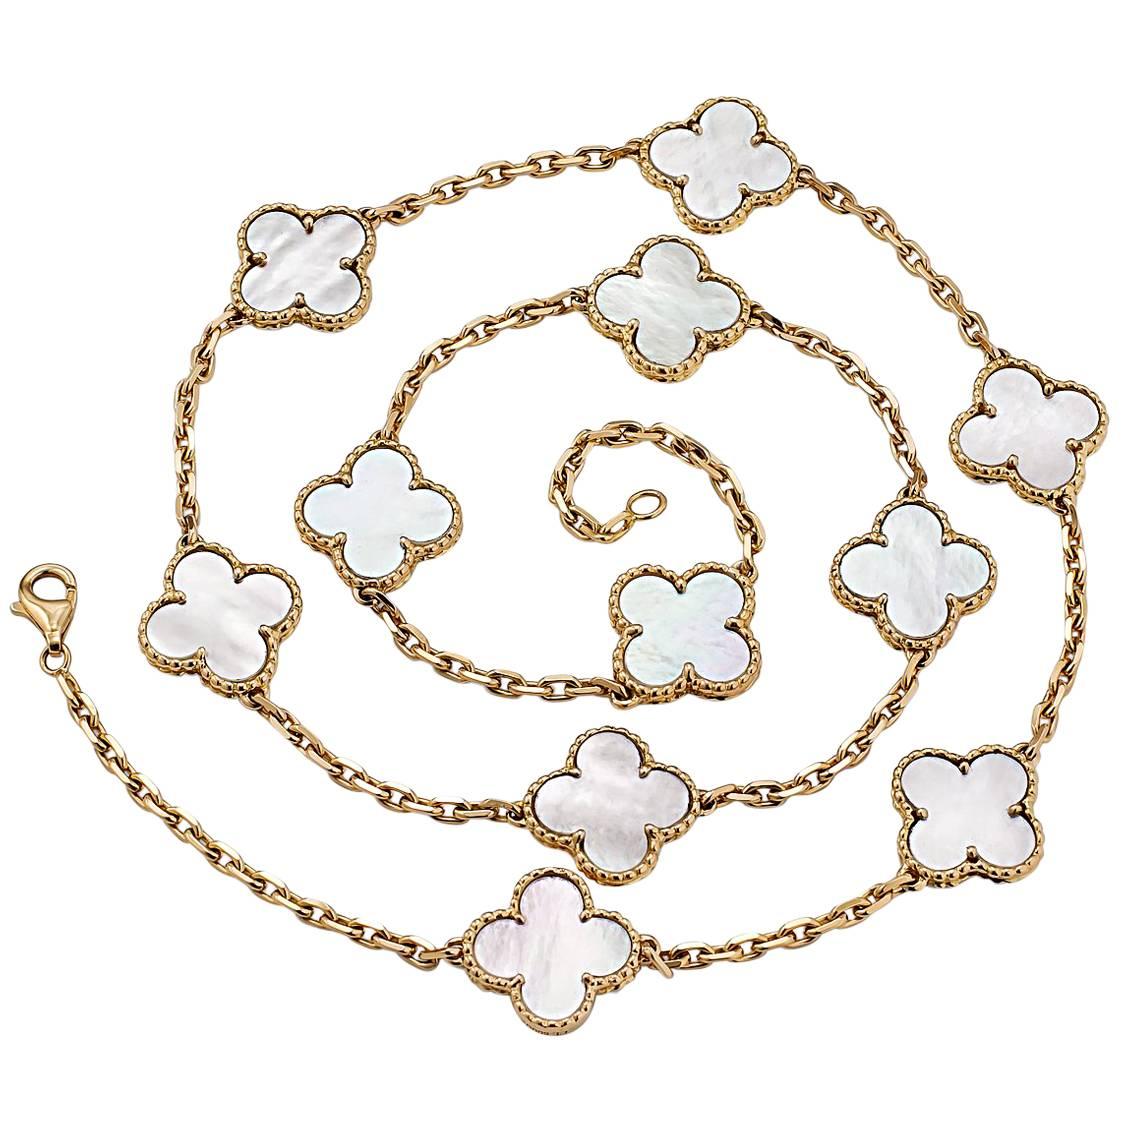 Van Cleef & Arpels Alhambra Gold and Mother-of-Pearl Necklace